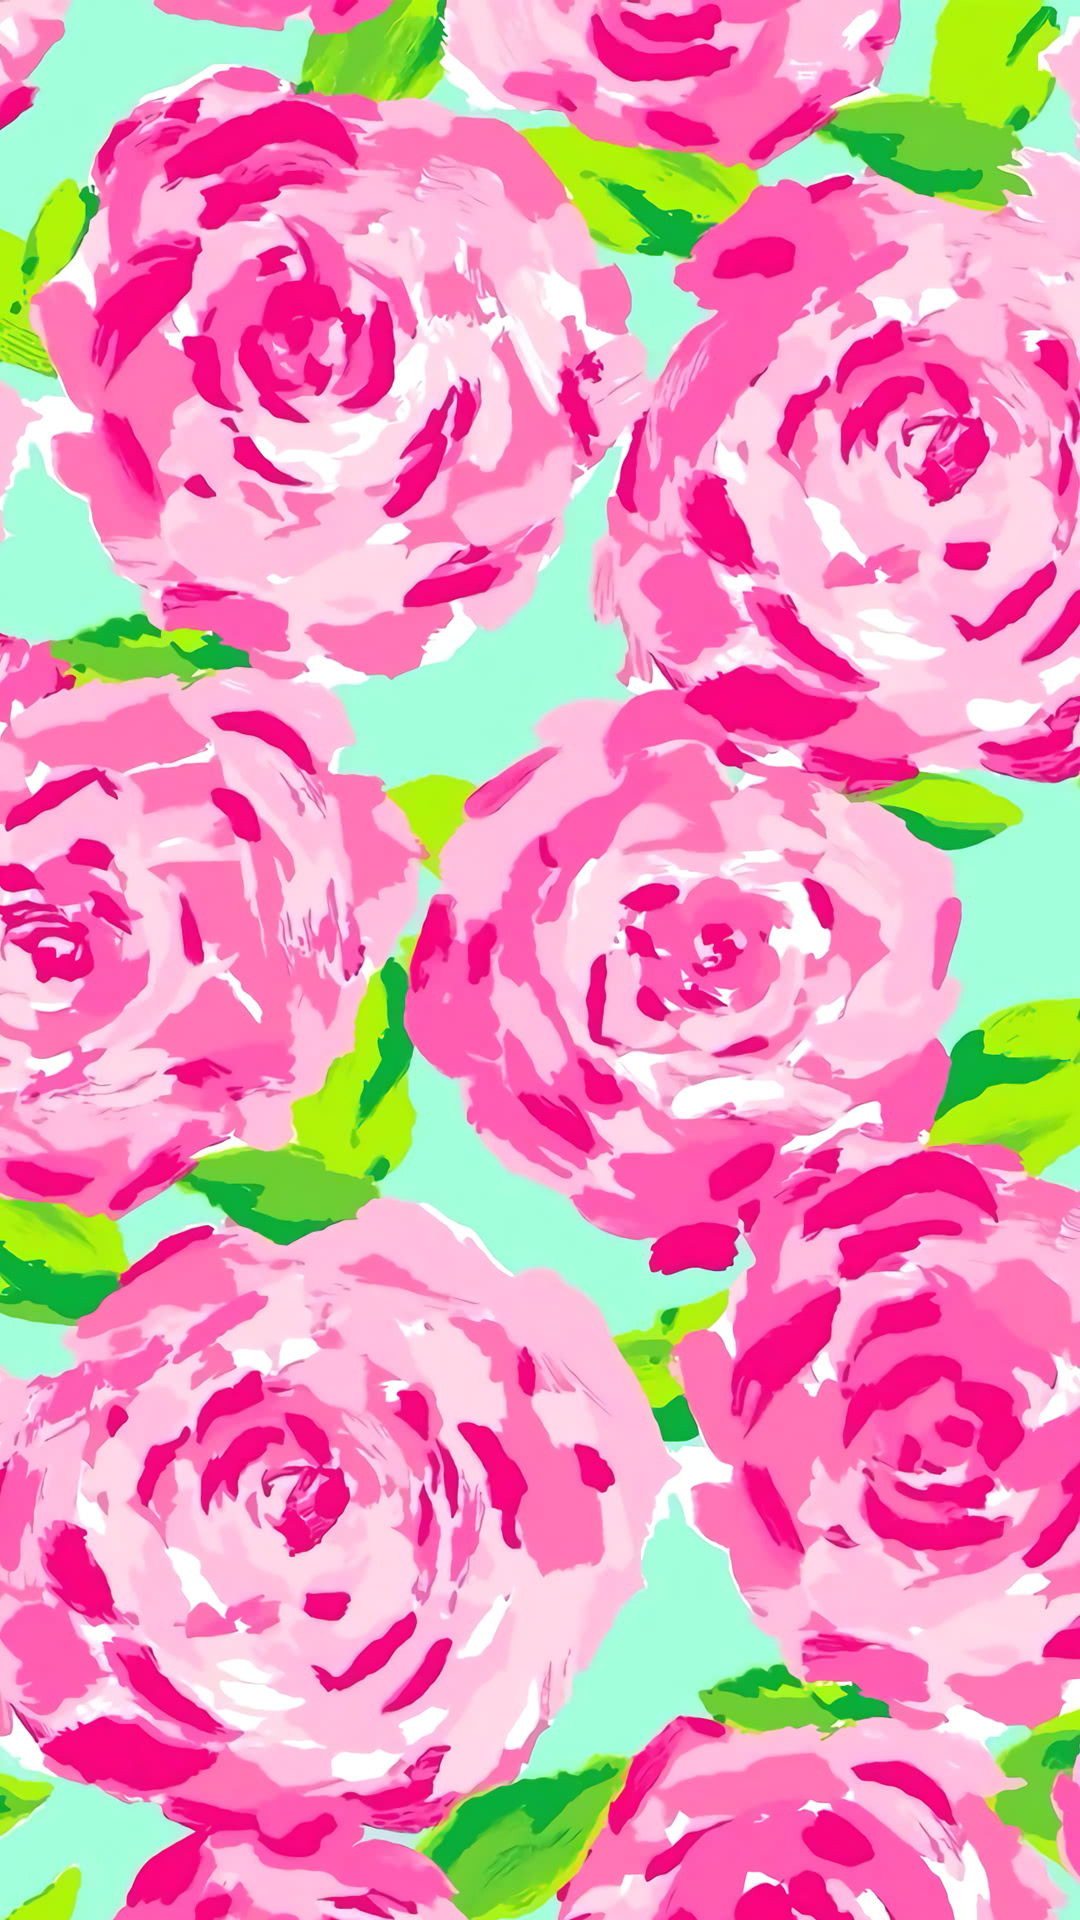 Lilly Pulitzer カワイイ薔薇のiphone X壁紙 Iphone Wallpapers